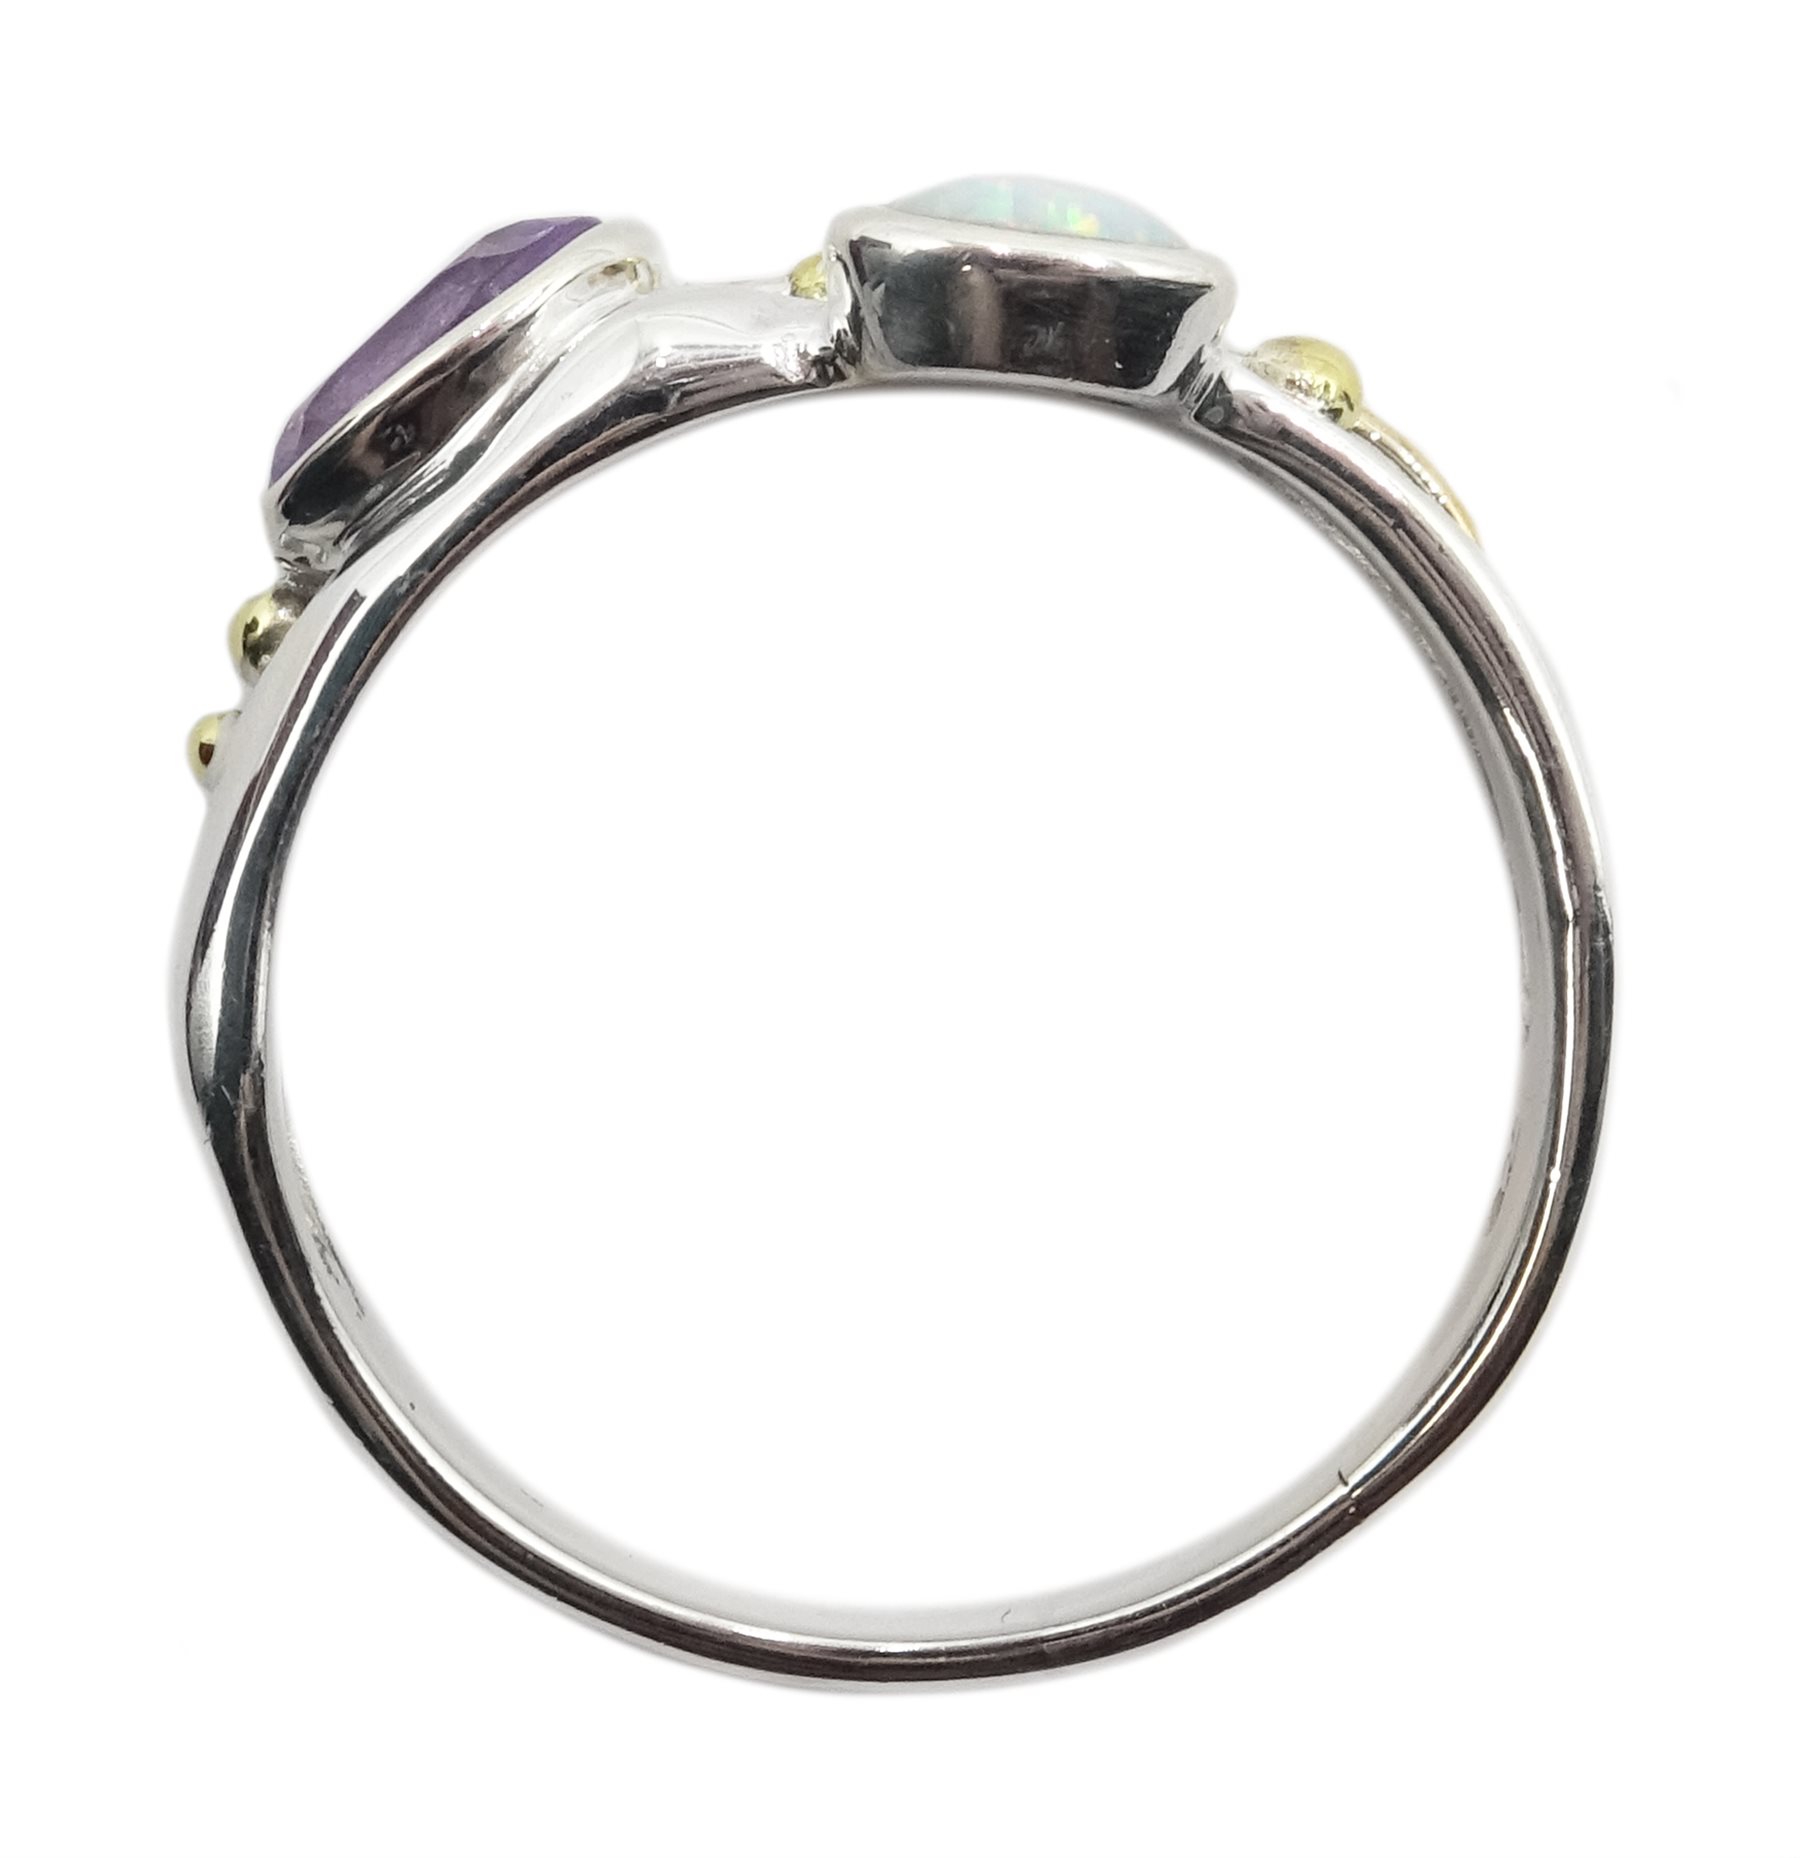 Silver and 14ct gold wire amethyst and opal ring - Image 3 of 7